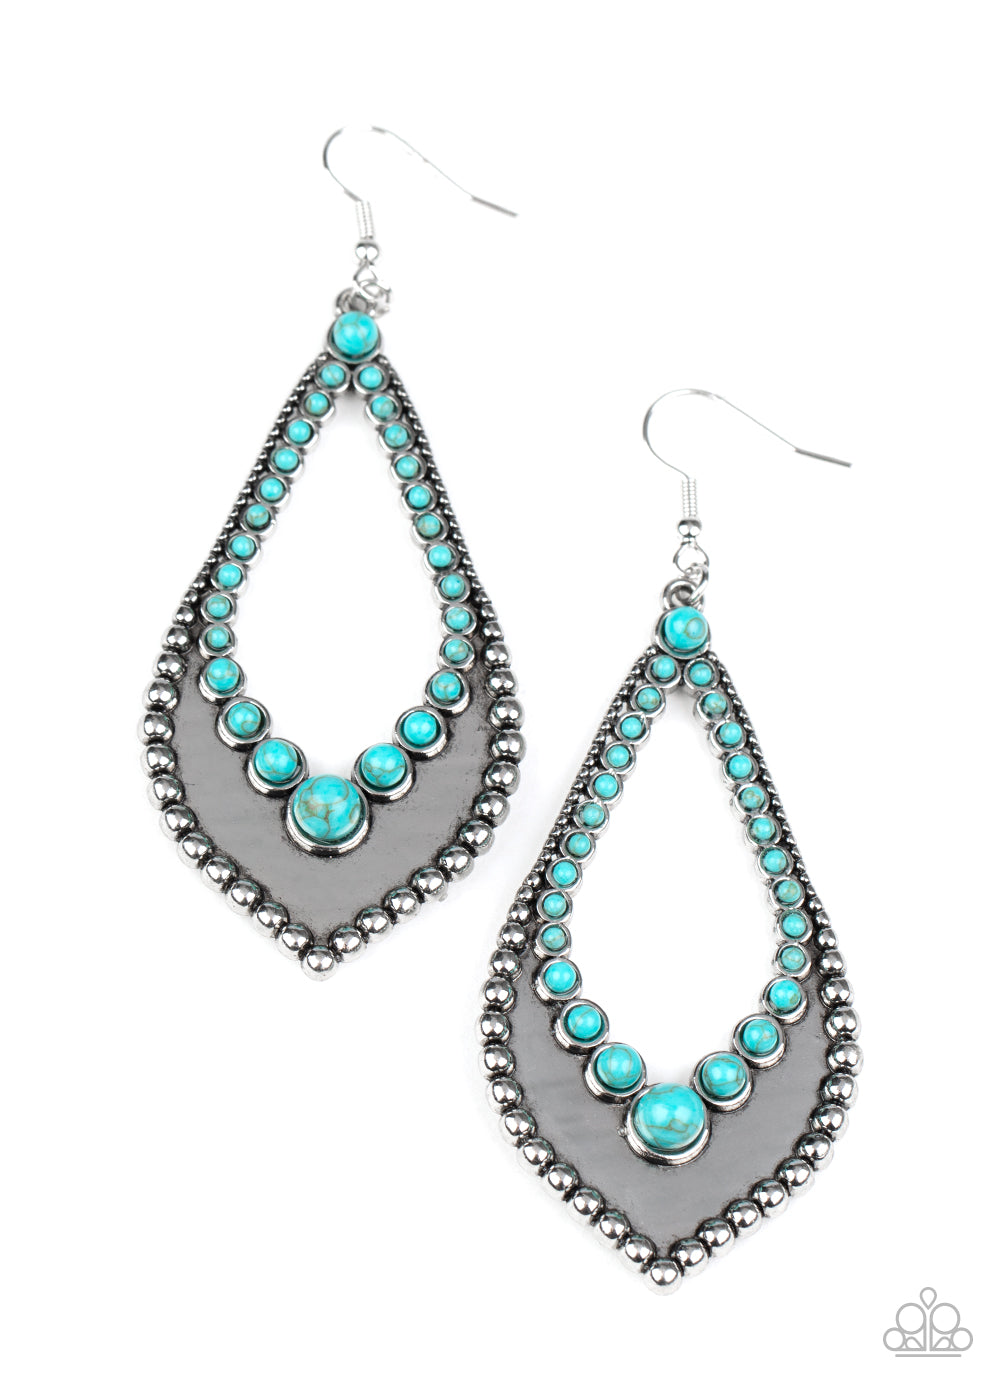 Essential Minerals - blue - Paparazzi earrings